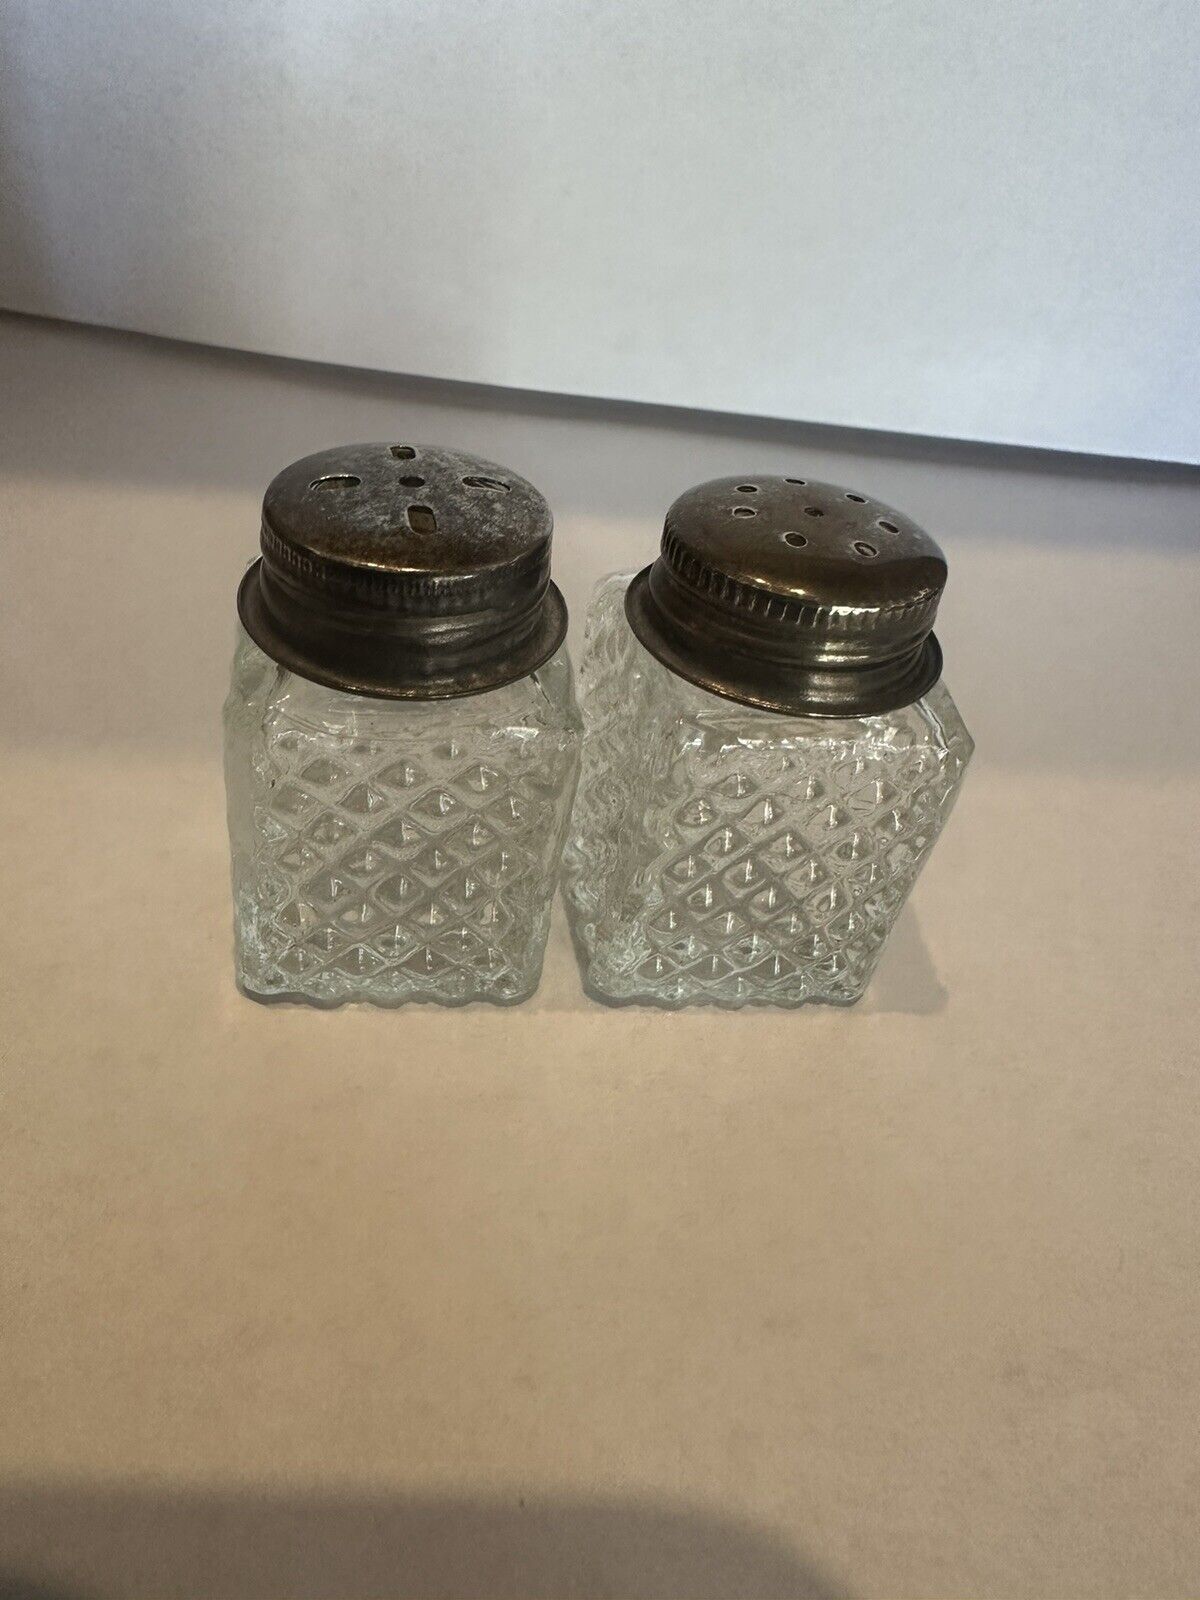 ANTIQUE MINIATURE SILVER PLATED GLASS SALT AND PEPPER SHAKERS